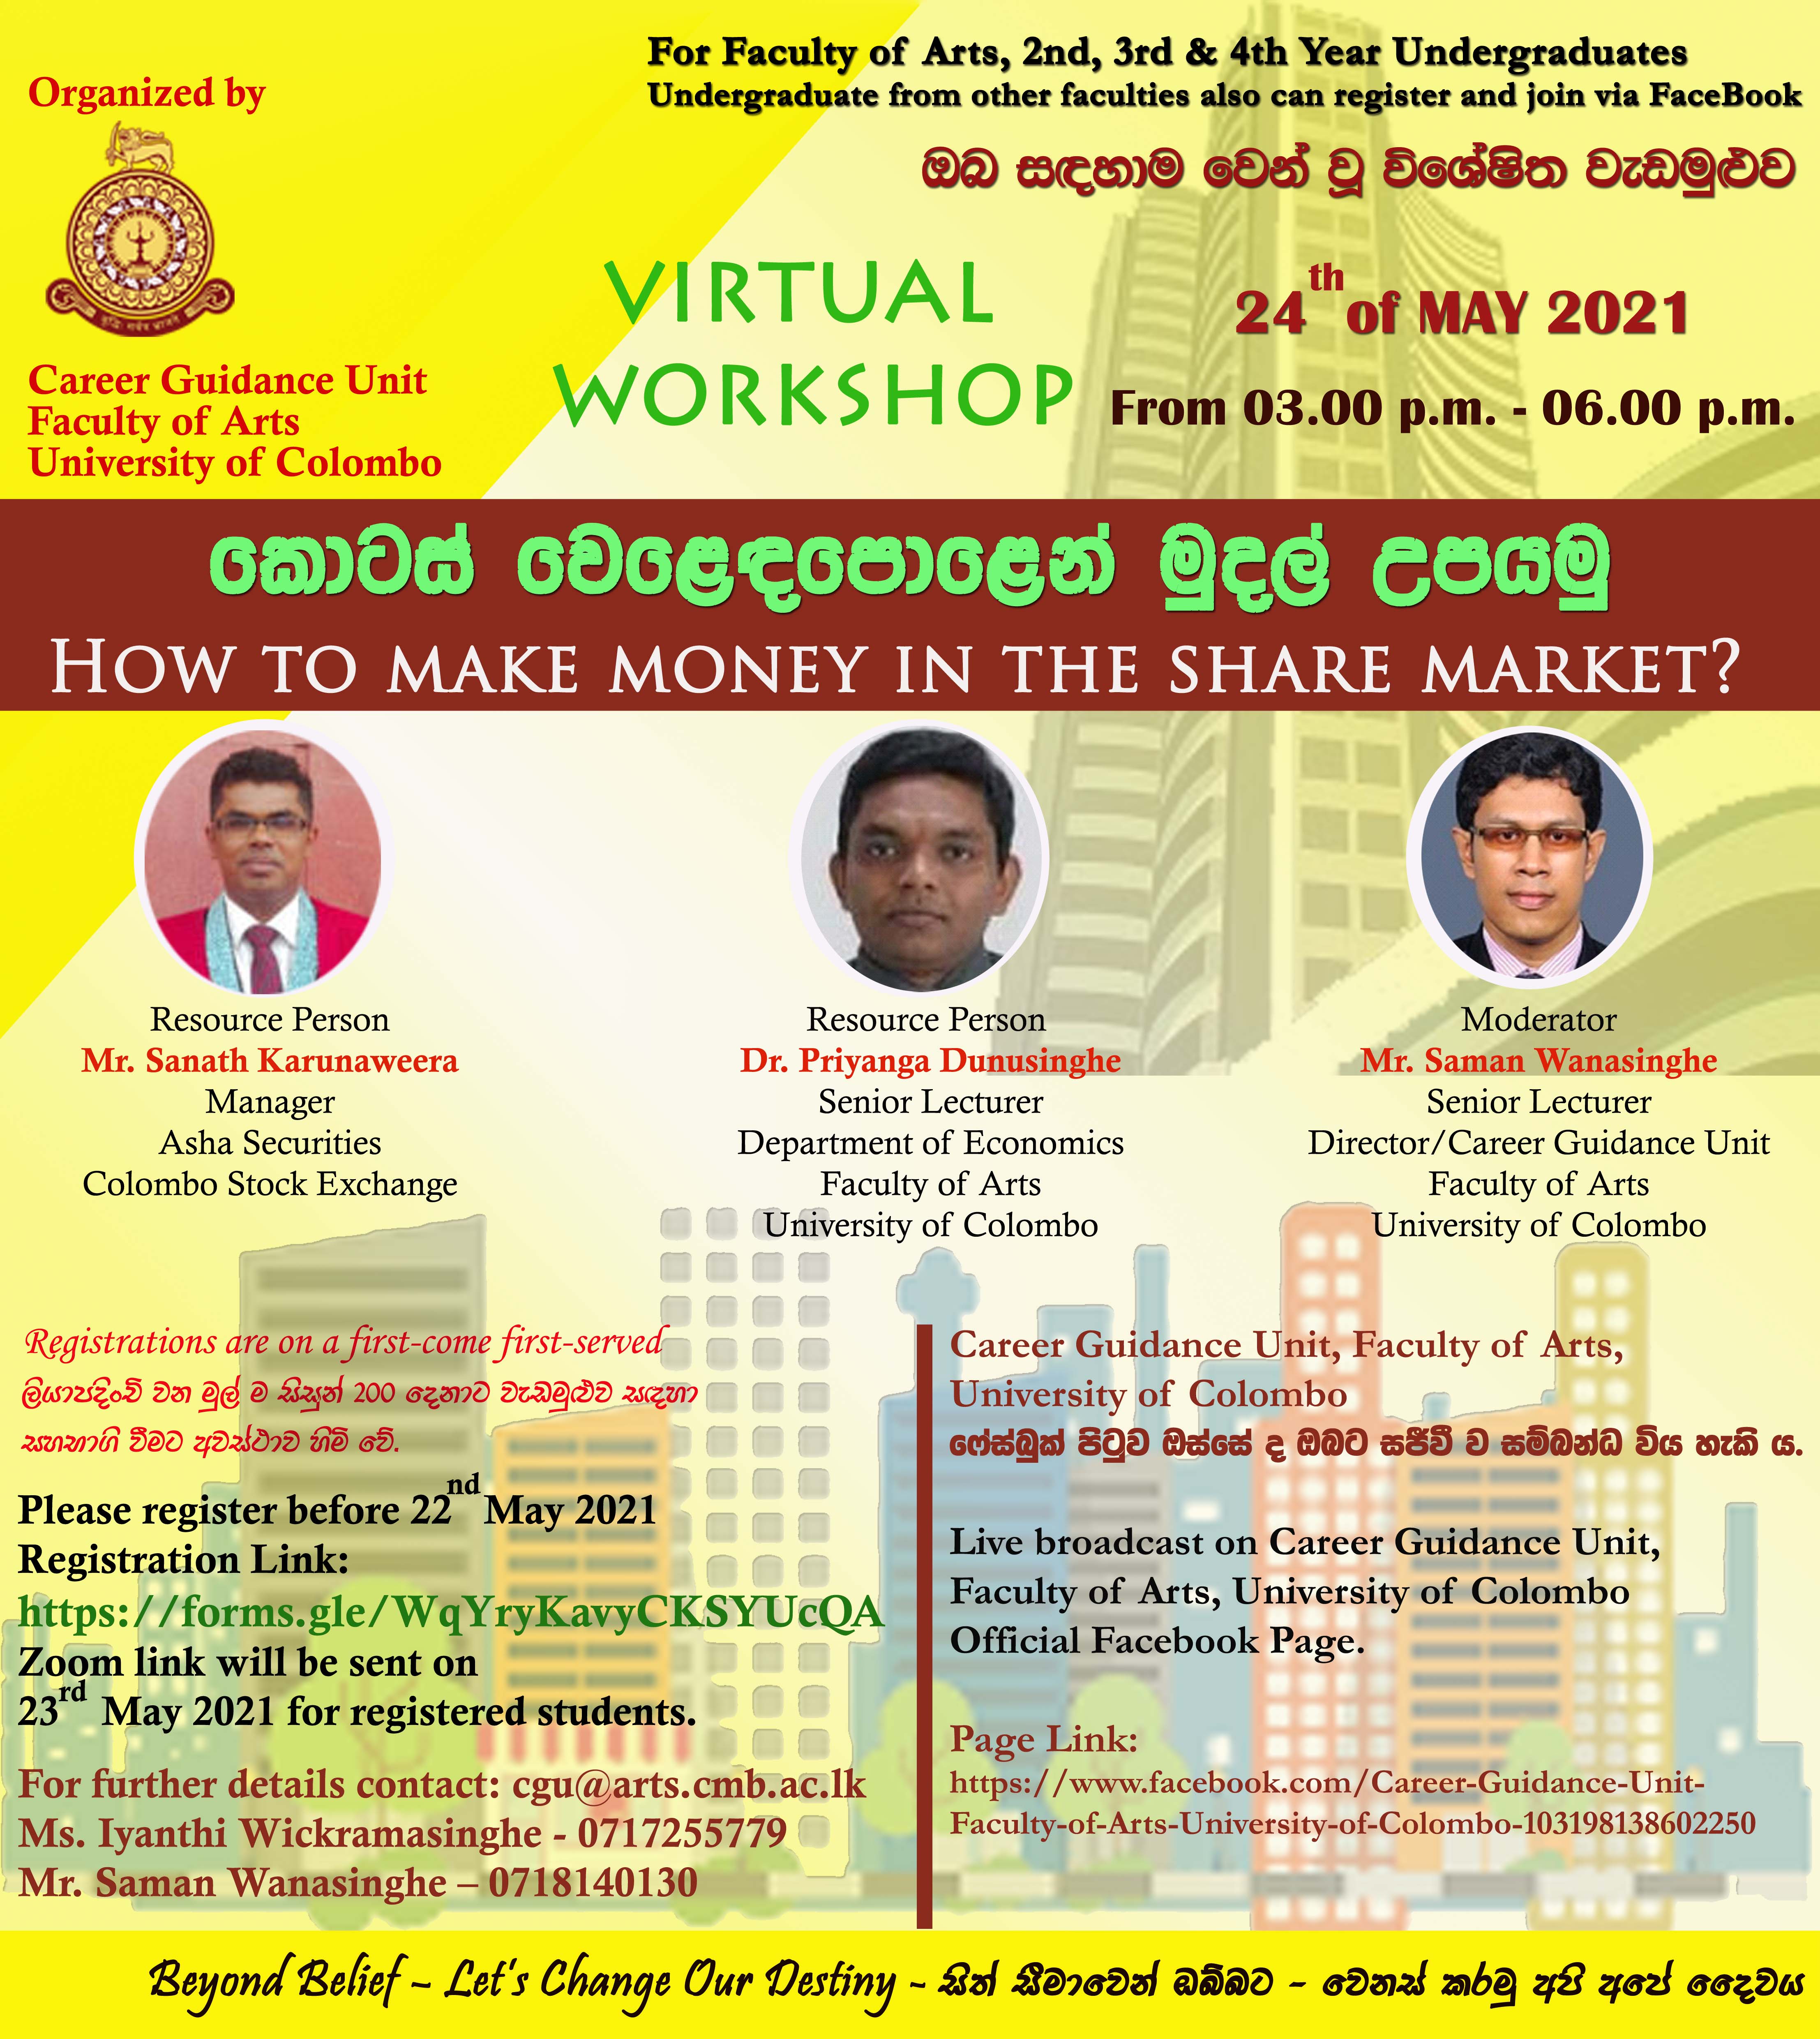 Workshop on “How to make money in the share market”